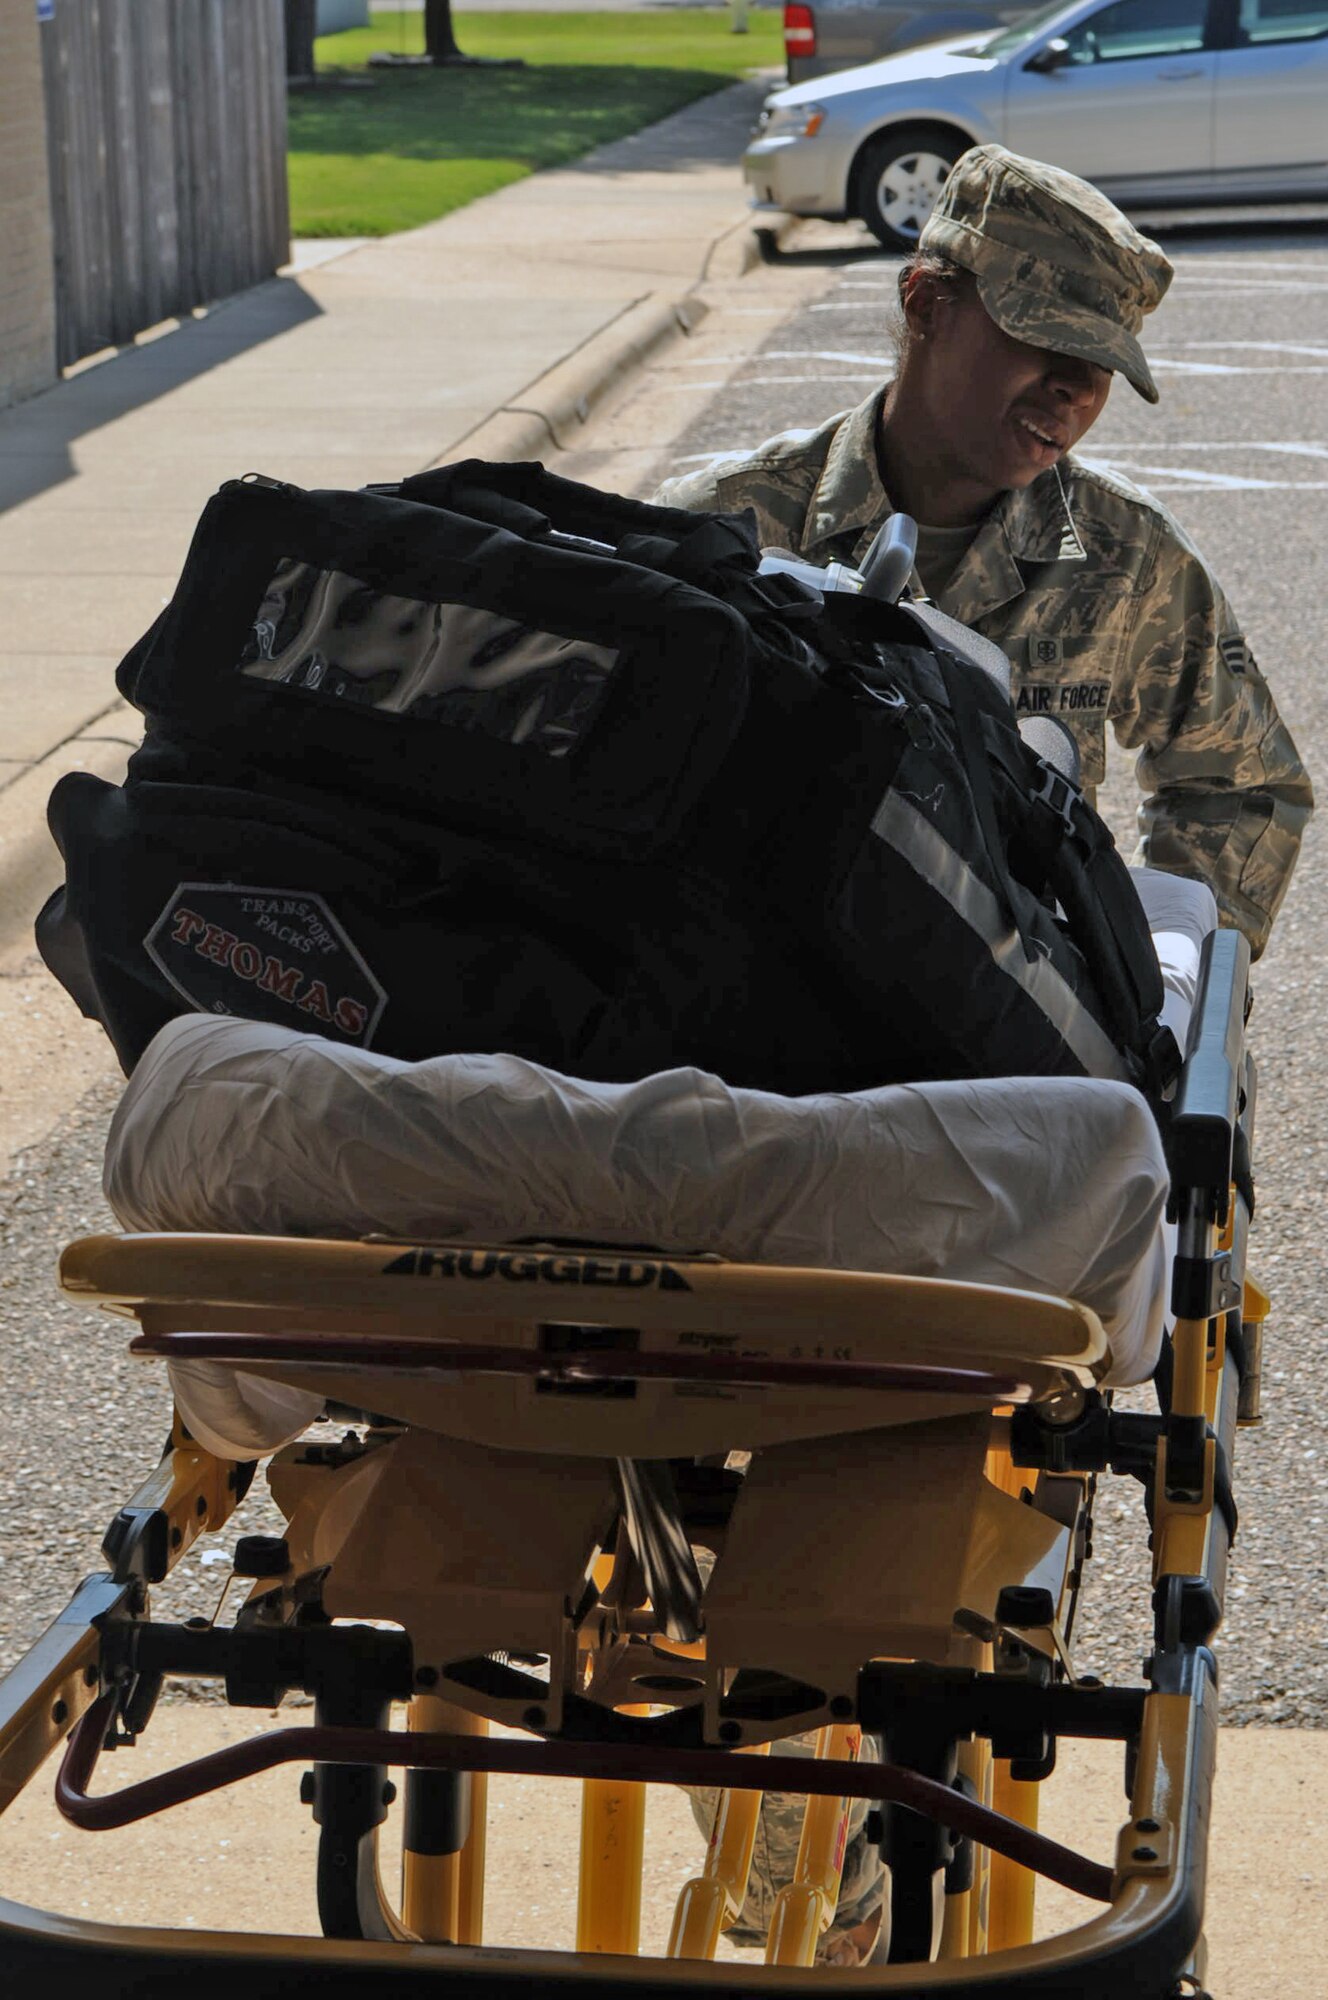 Senior Airman Jasmine Russell, 2nd Medical Operations Squadron, pulls a gurney from the back of an ambulance on Barksdale Air Force Base, La., June 29. Airman Russell recently returned from her first deployment in Afghanistan. On her deployment she sustained injuries due to an improvised explosive device that hit the vehicle she was traveling in. Despite her injuries, Airman Russell continued to provide medical care to the injured after the blast. (U.S. Air Force photo/Airman 1st Class Micaiah Anthony)(RELEASED)